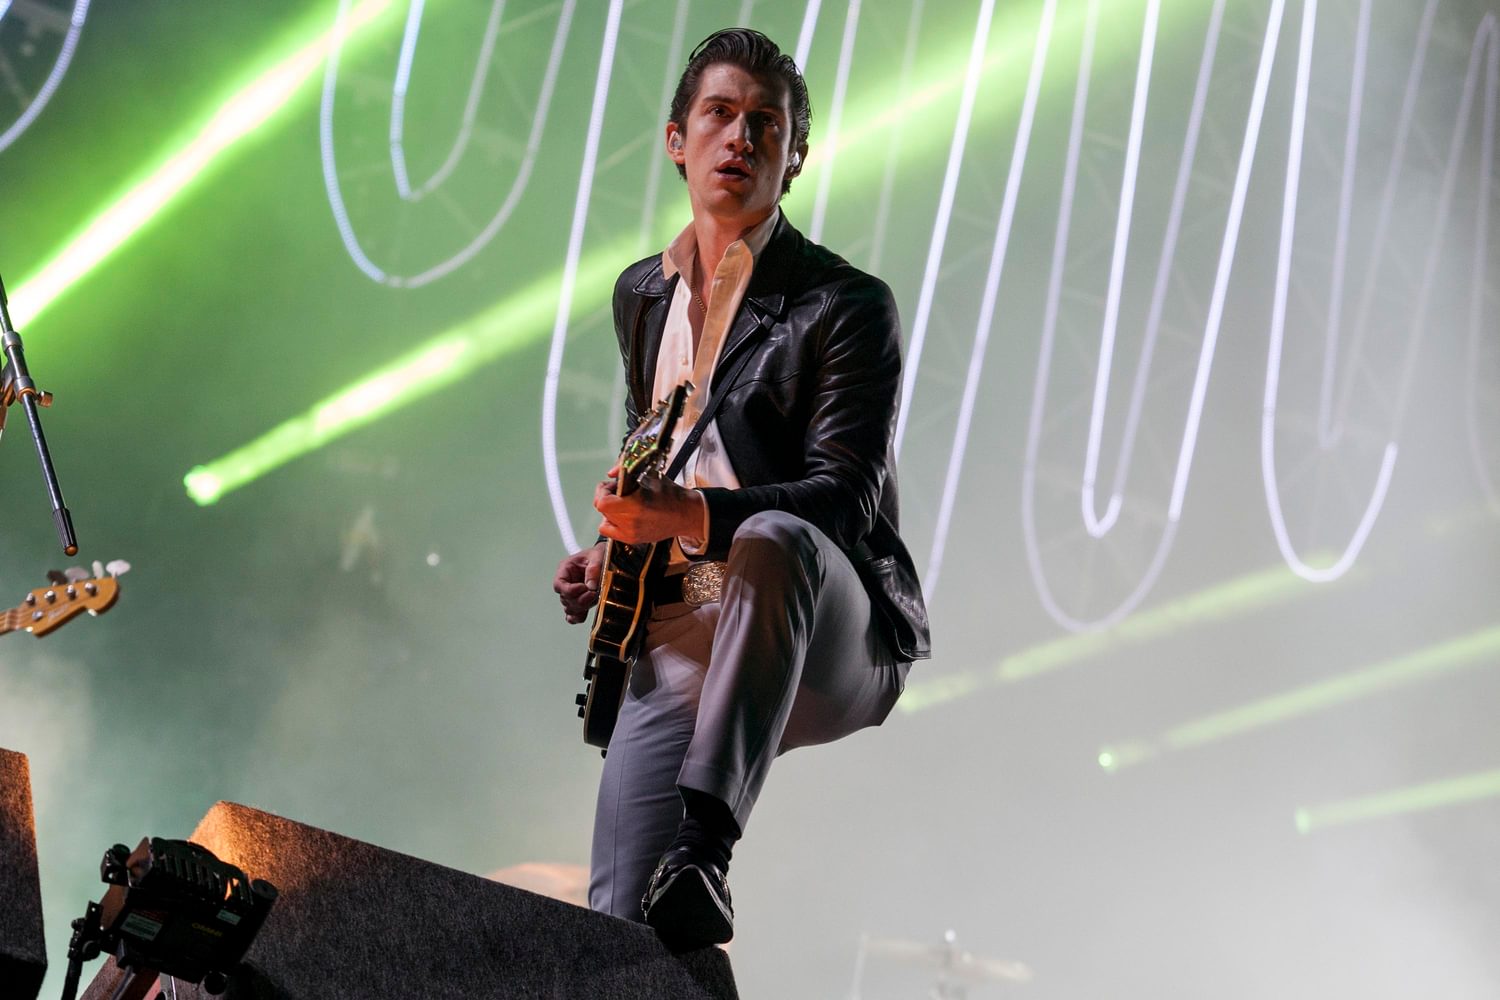 Arctic Monkeys announce Royal Albert Hall show in aid of War Child